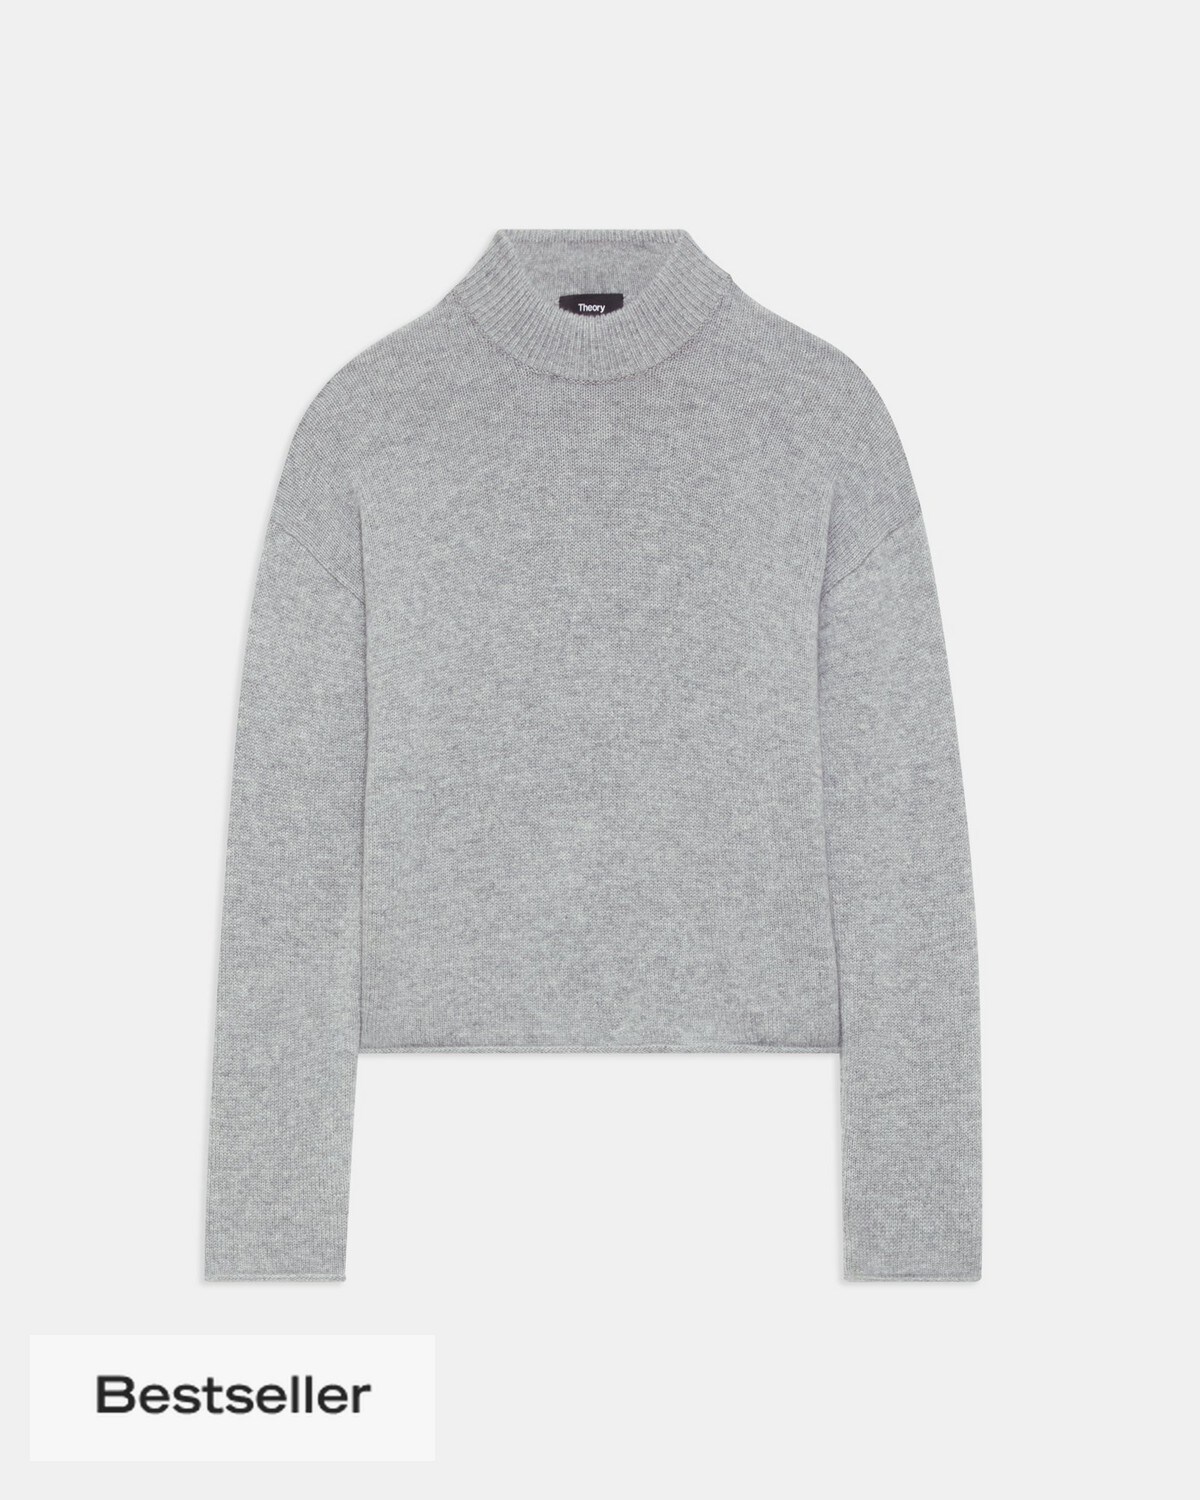 Cropped Mock Neck Sweater in Cashmere